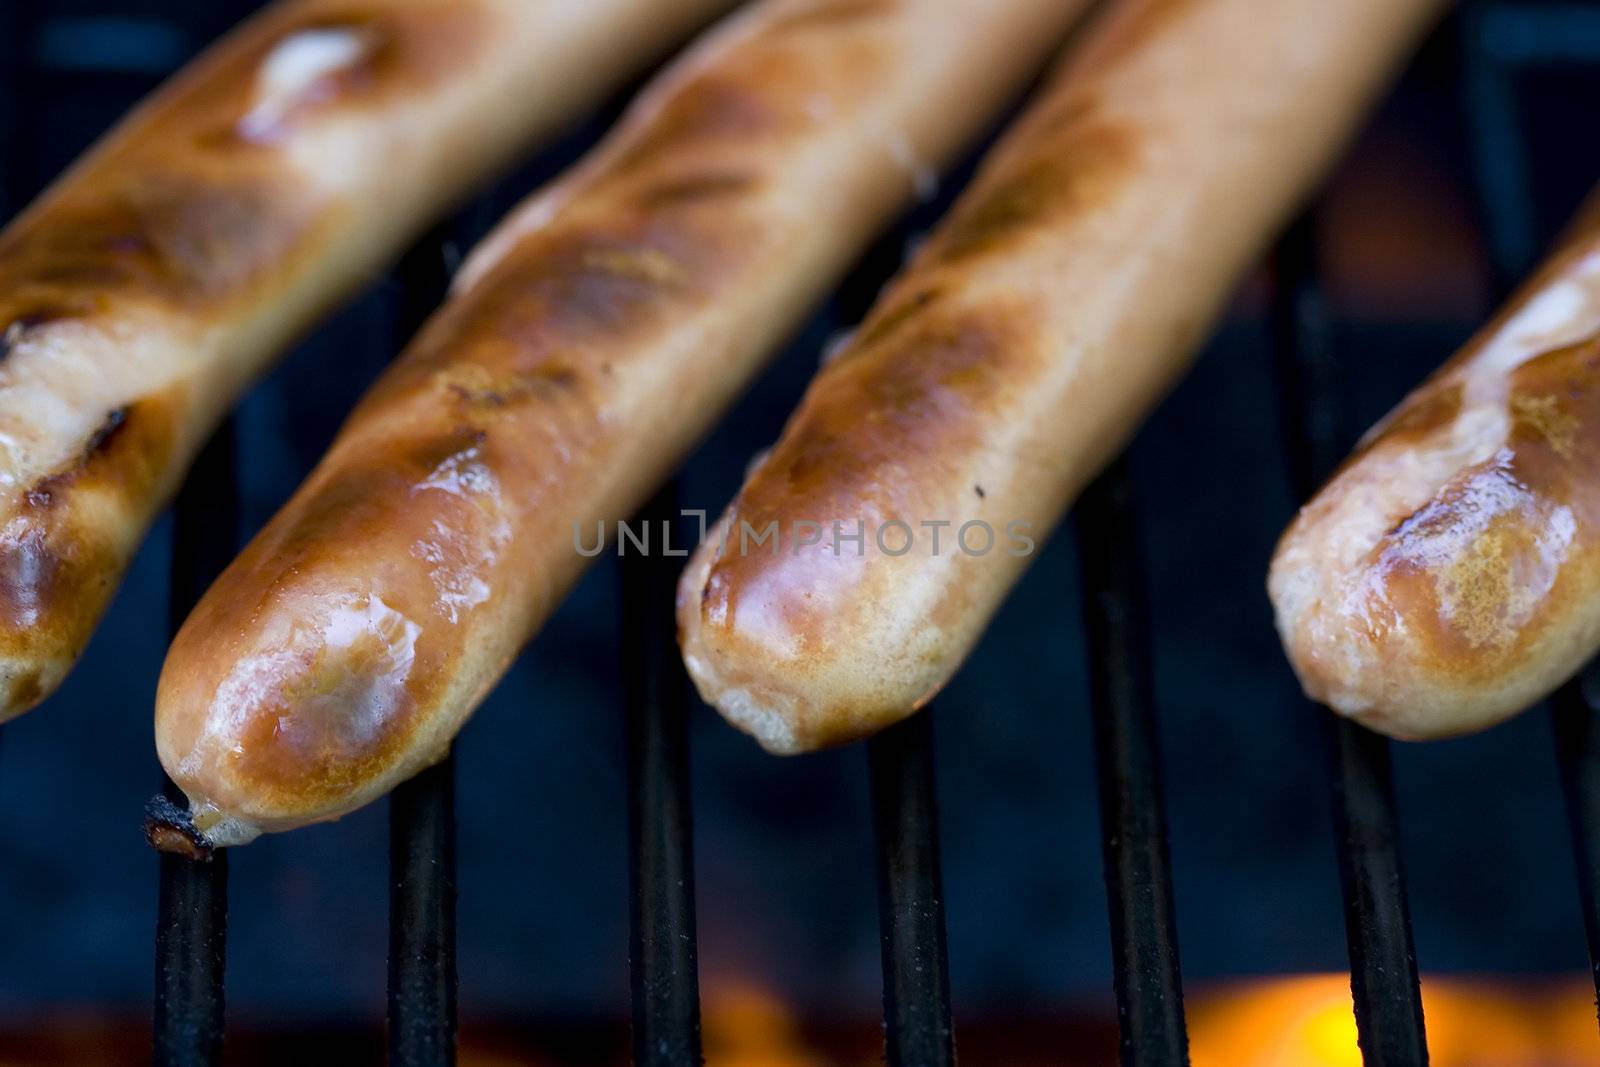 A summer bbq staple hotdogs on the grill close up shots shallow depth of view nice grill marks 